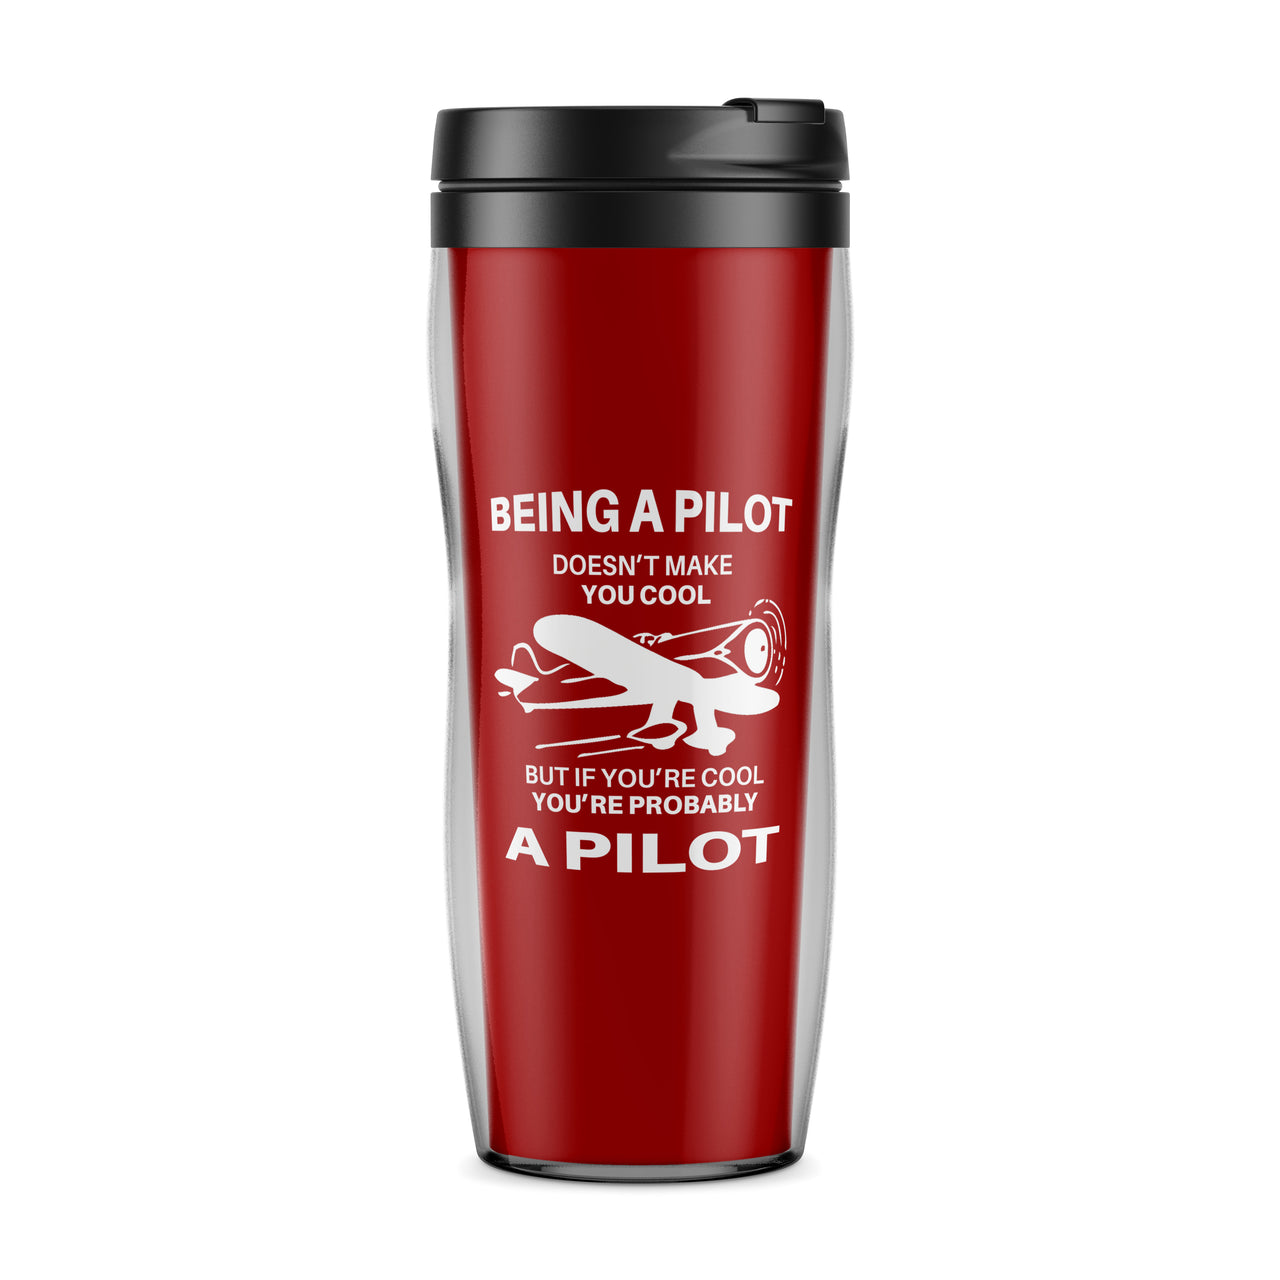 If You're Cool You're Probably a Pilot Designed Travel Mugs